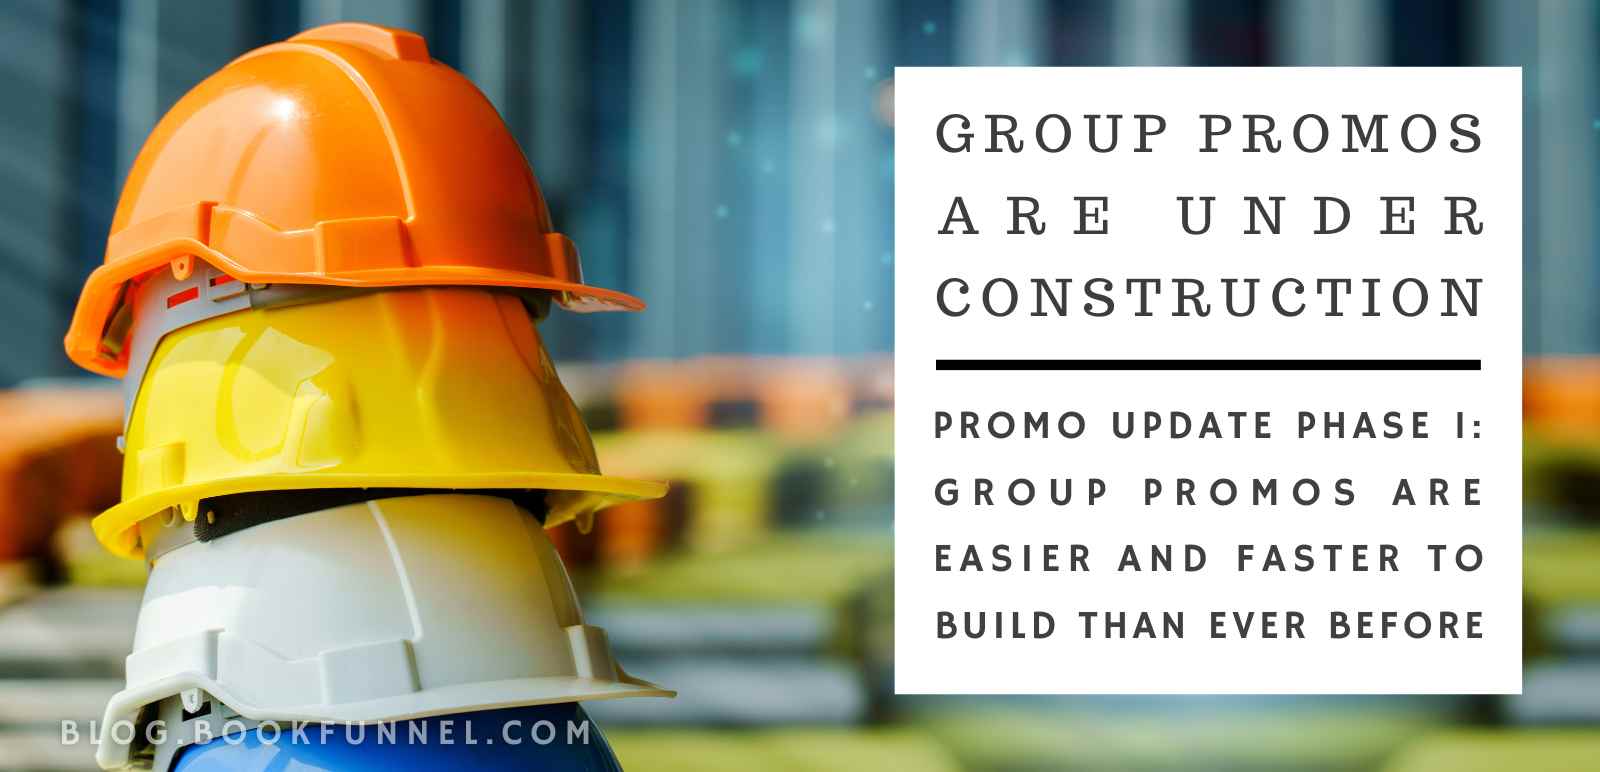 Announcing New Features for Group Promos